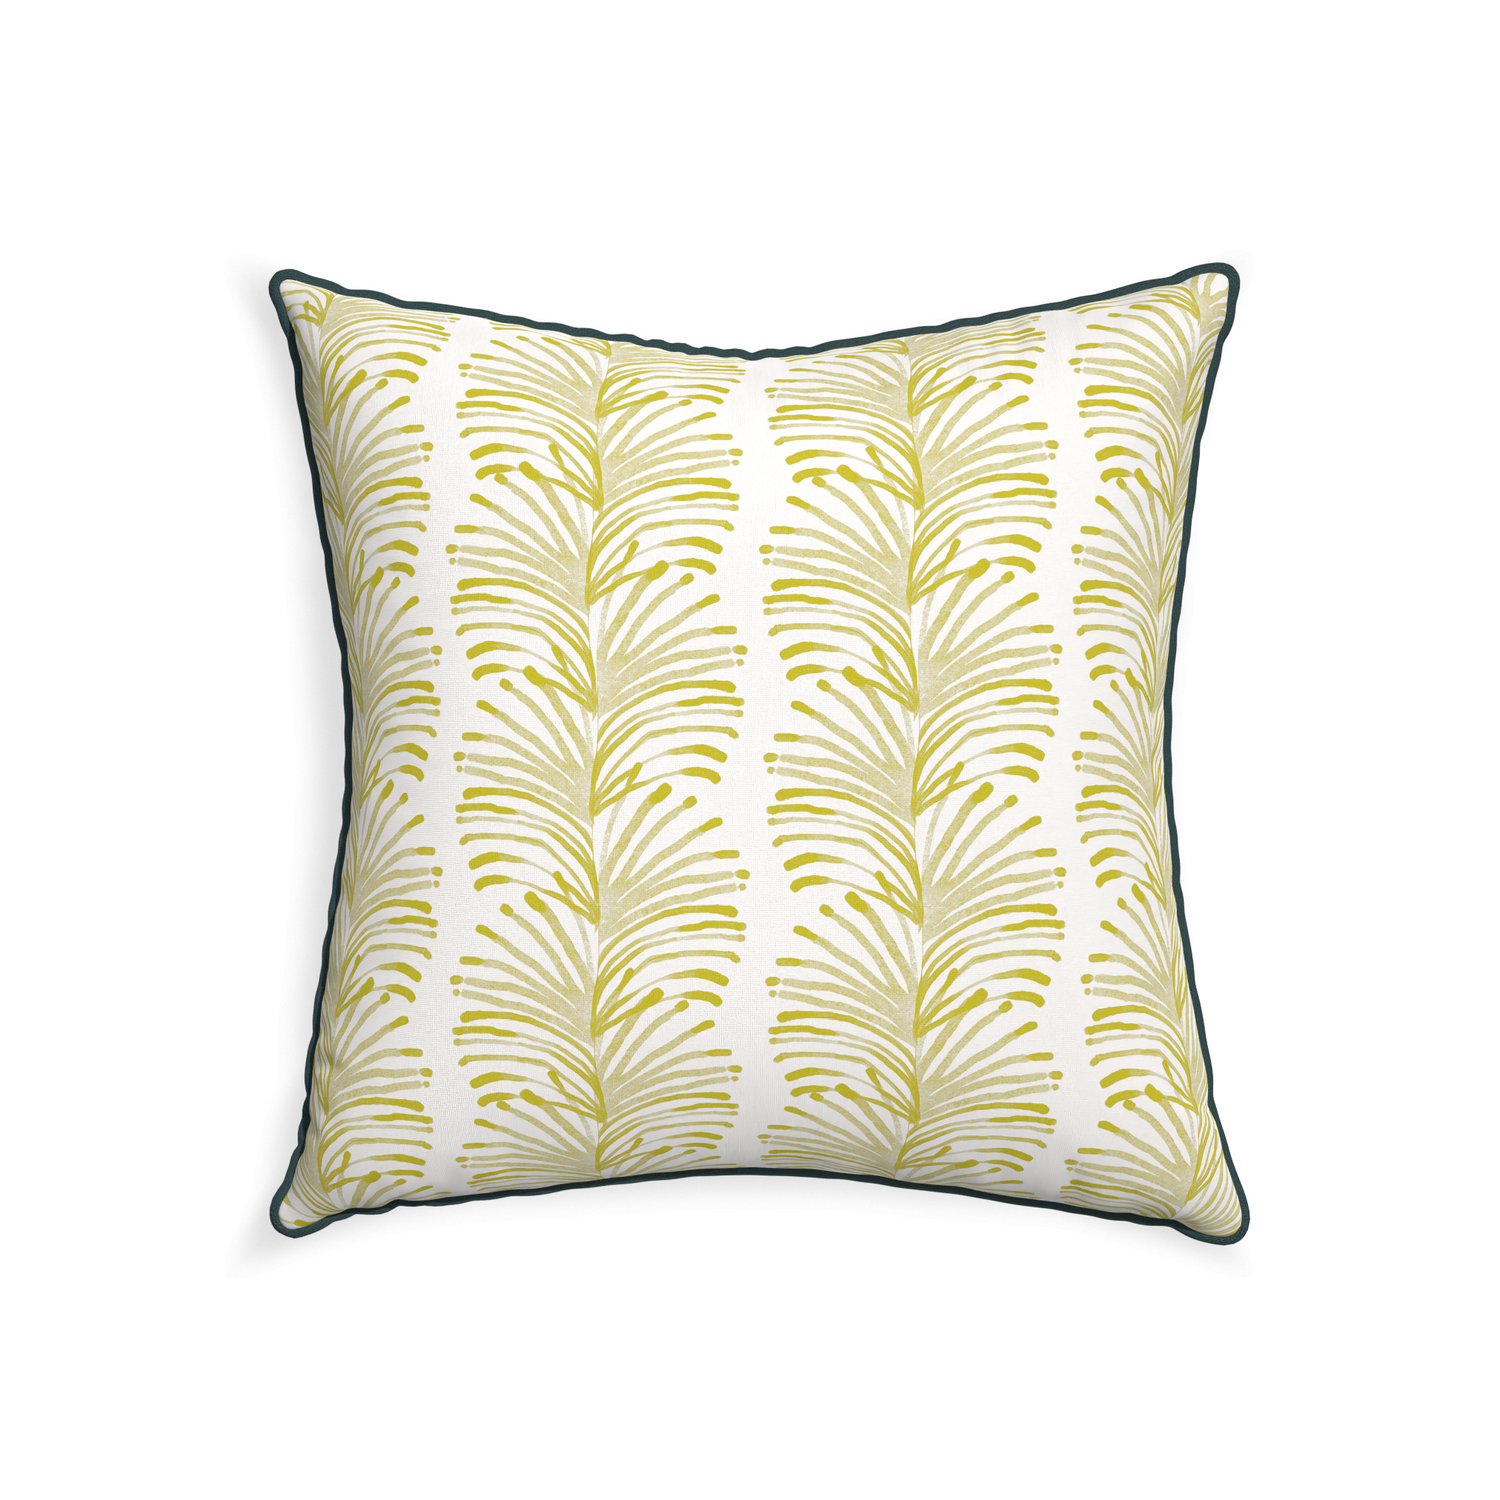 22-square emma chartreuse custom yellow stripe chartreusepillow with p piping on white background